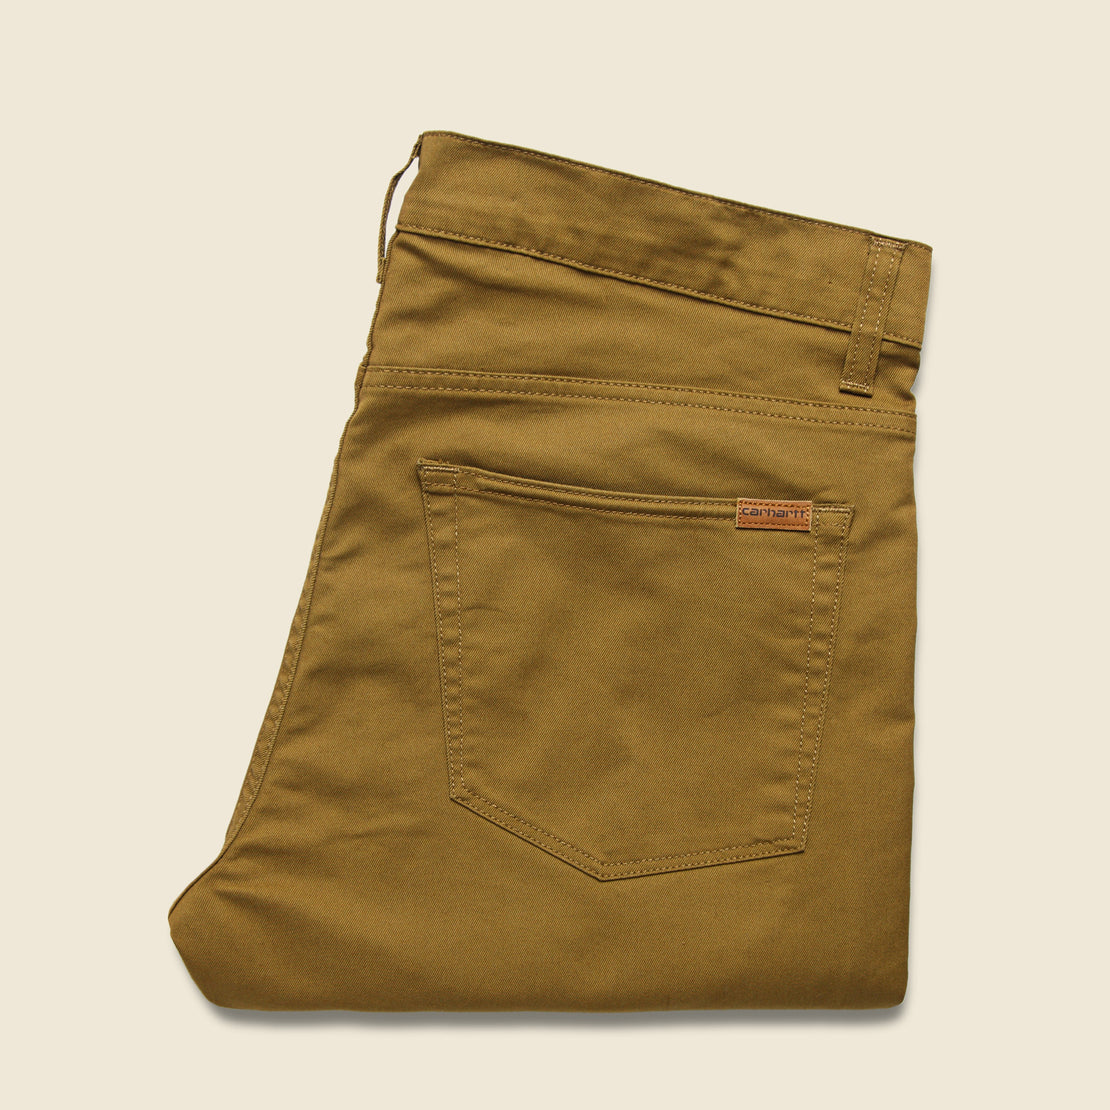 Vicious Pant - Hamilton Brown - Carhartt WIP - STAG Provisions - Pants - Twill